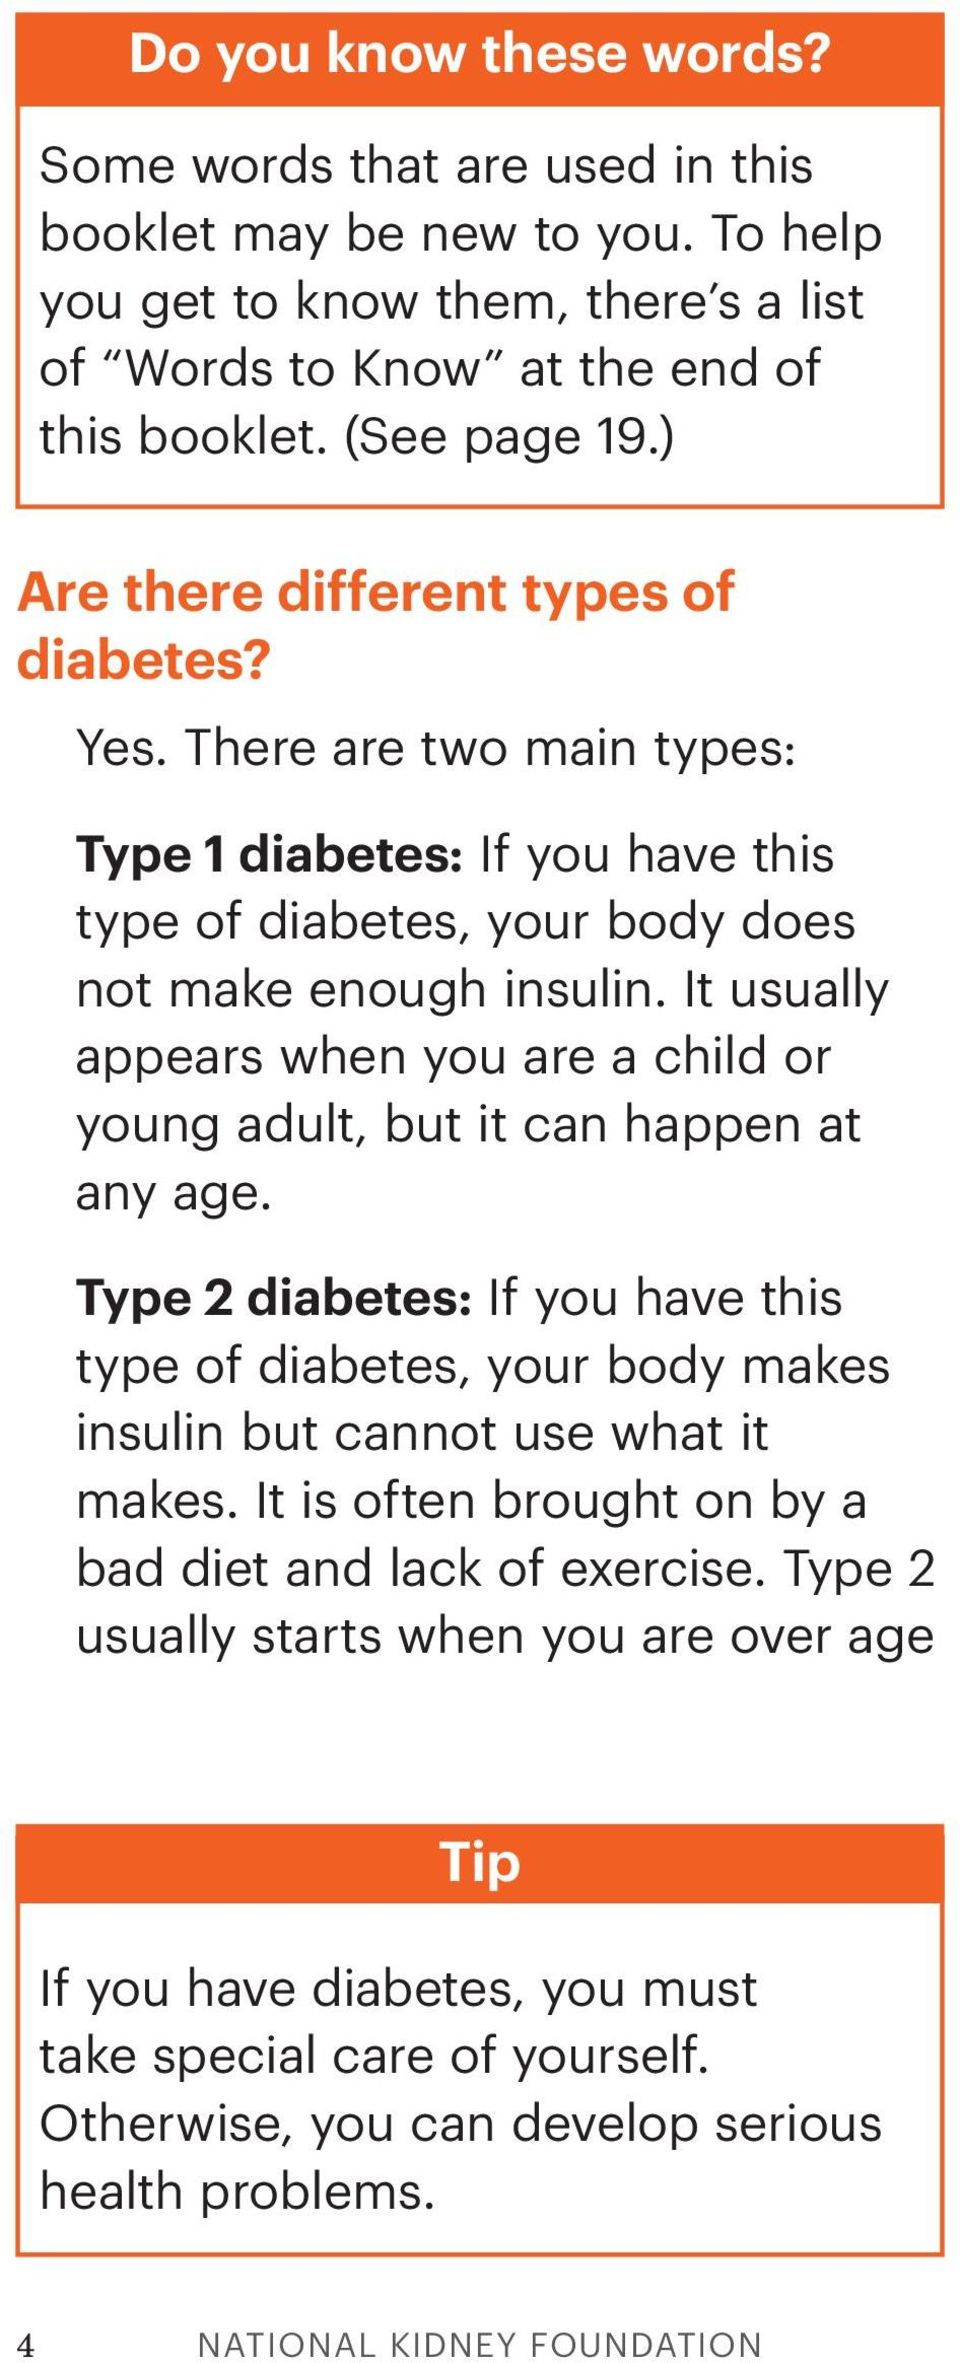 It usually appears when you are a child or young adult, but it can happen at any age. Type 2 diabetes: If you have this type of diabetes, your body makes insulin but cannot use what it makes.